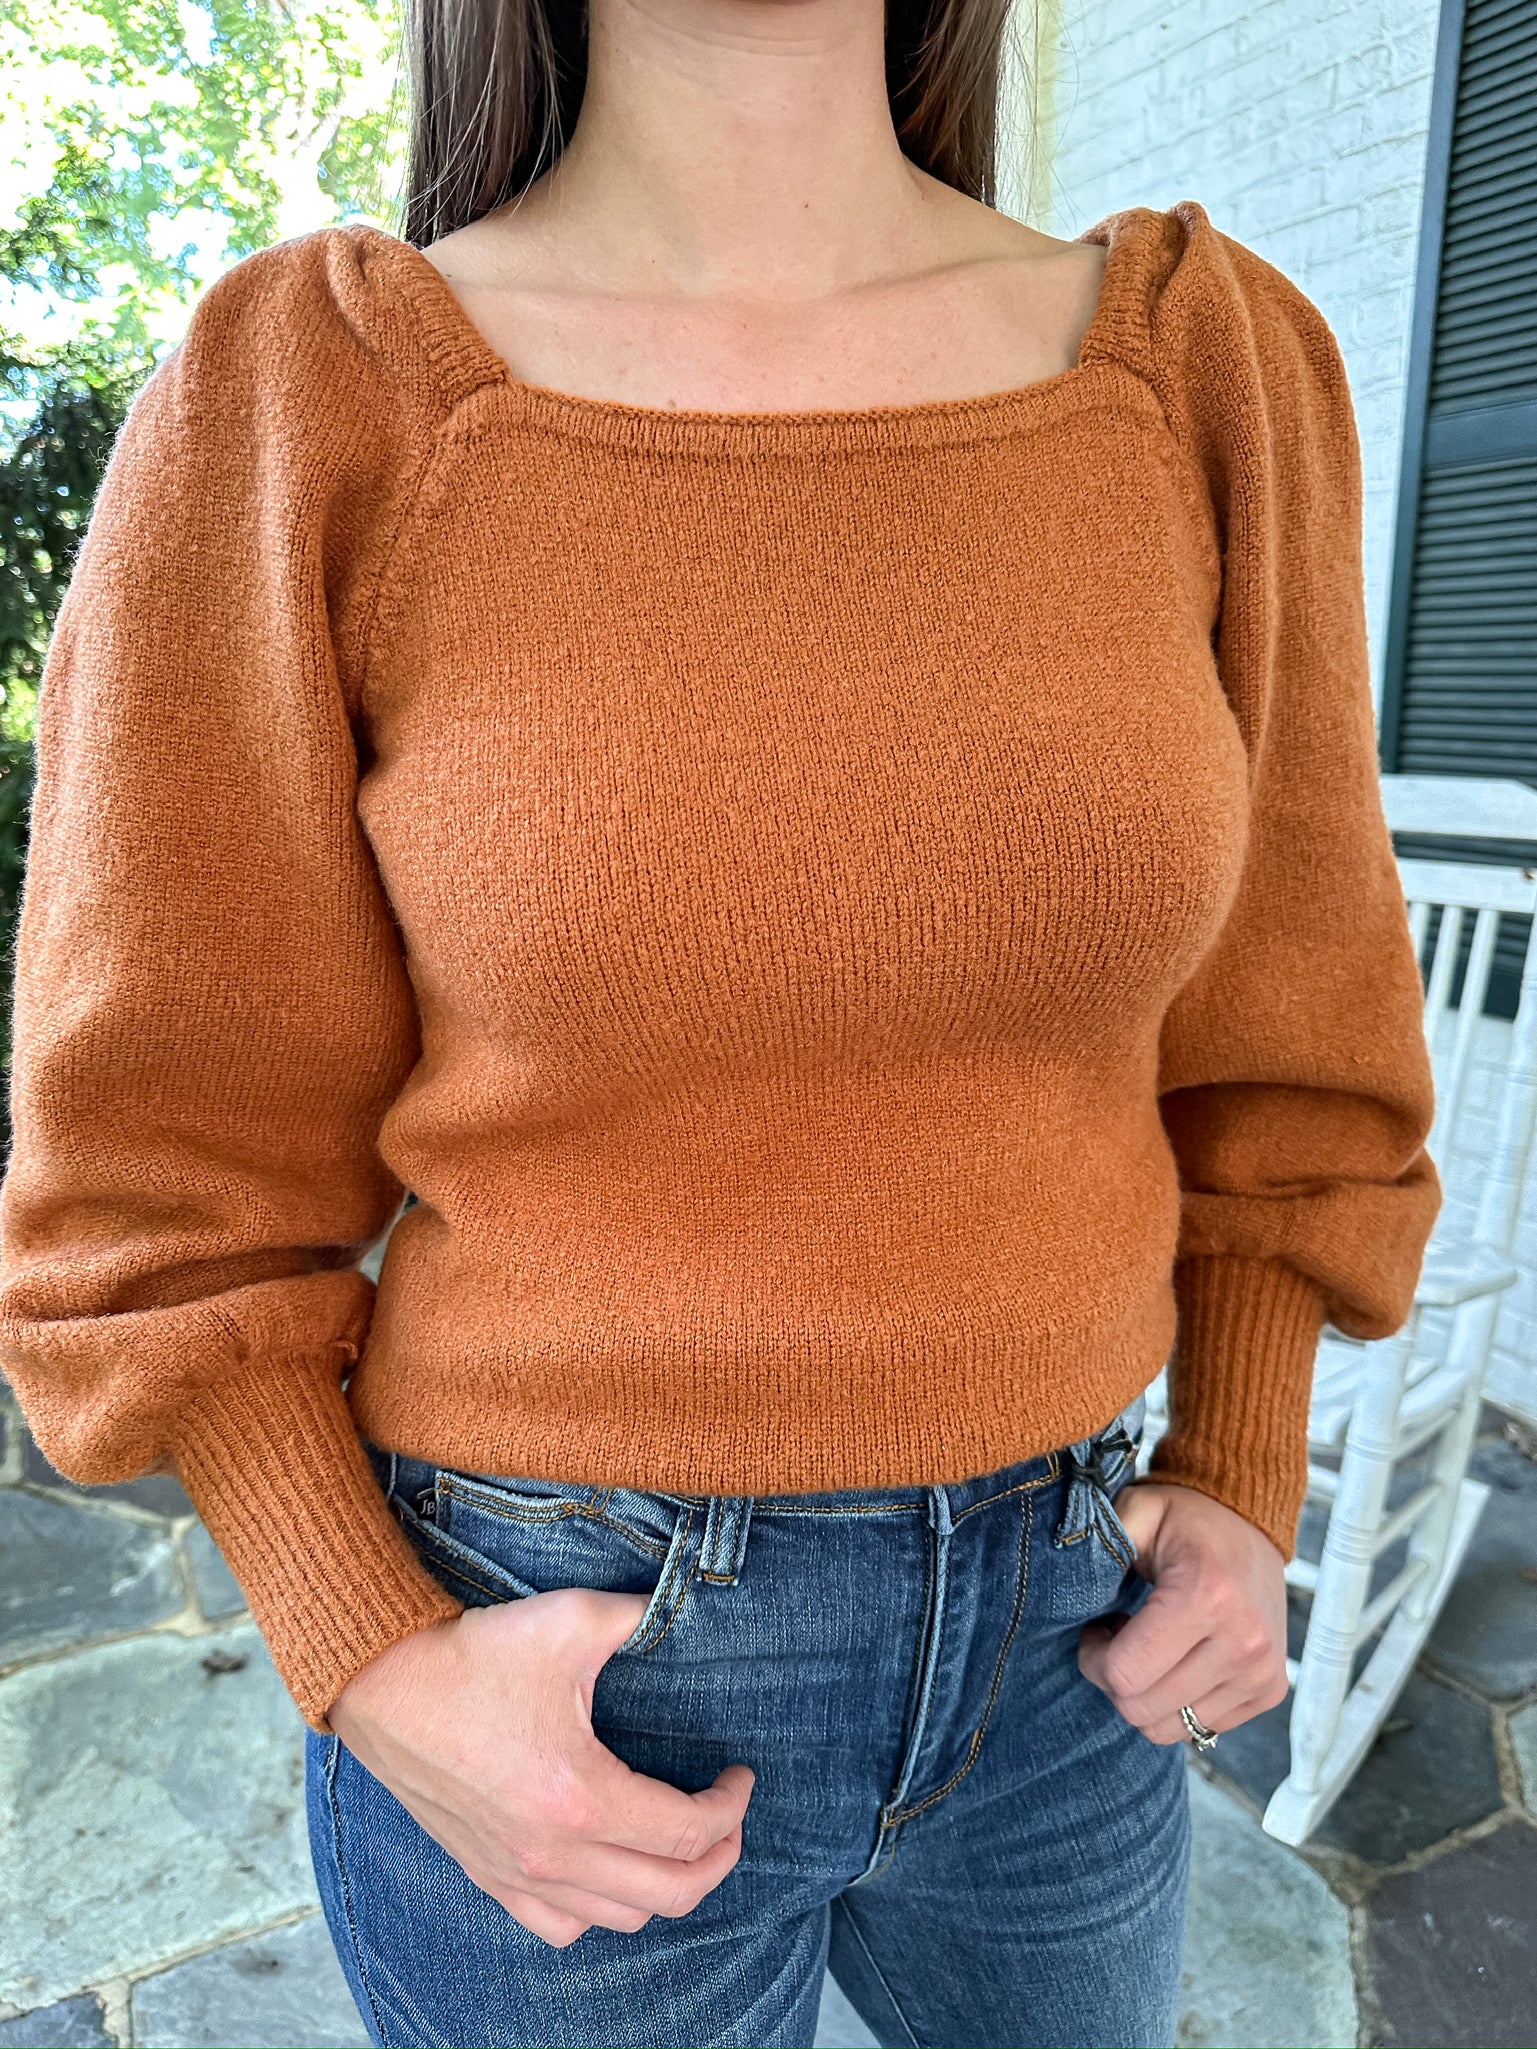 It's Okay to be Square Rust Sweater